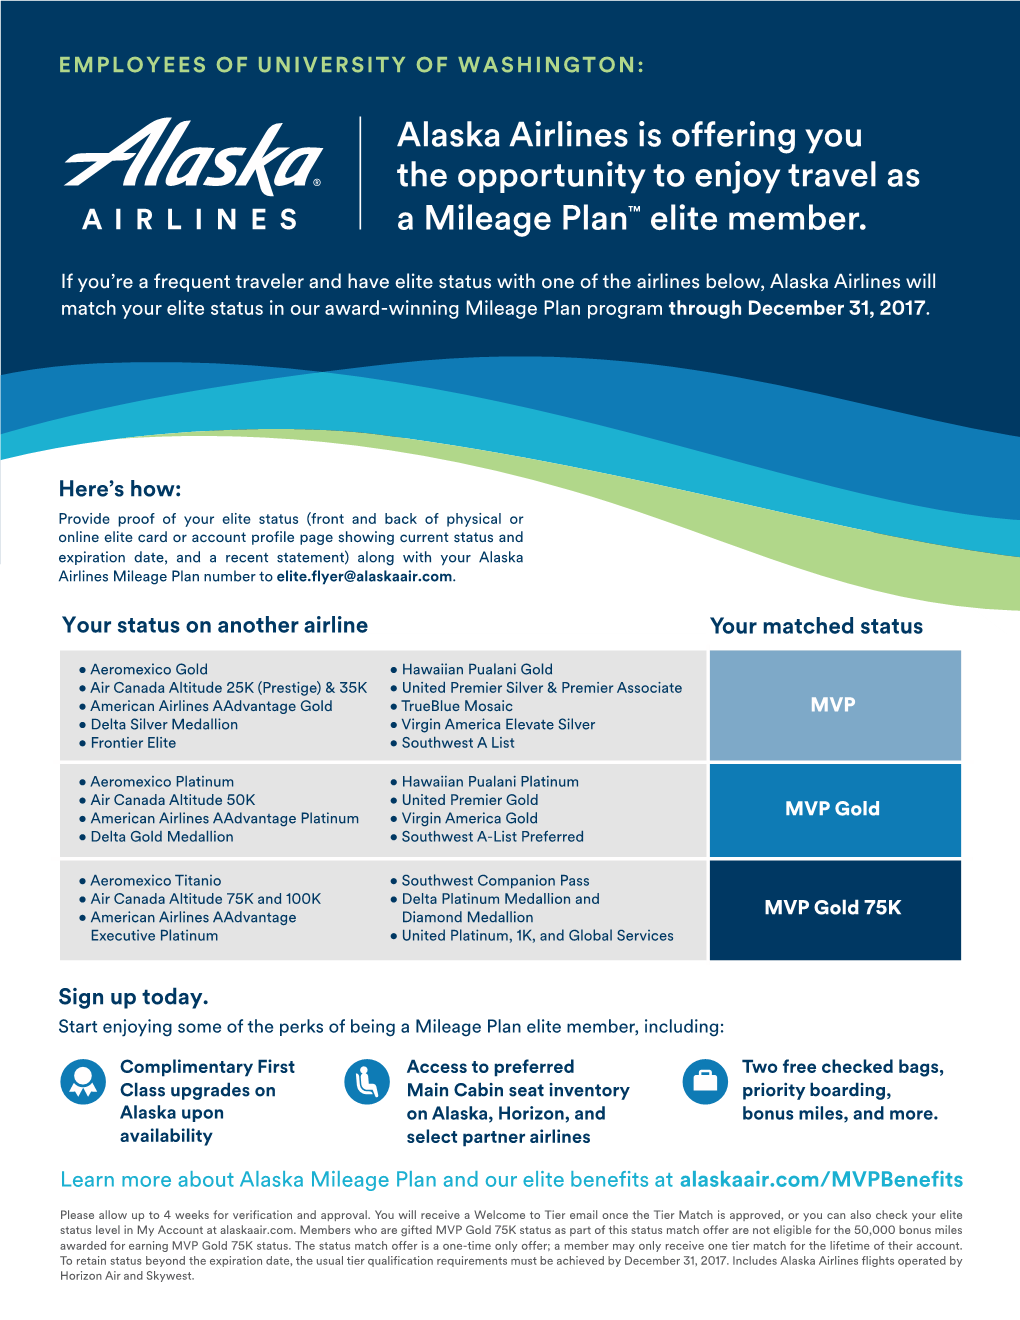 Alaska Airlines Is Offering You the Opportunity to Enjoy Travel As a Mileage Plan™ Elite Member